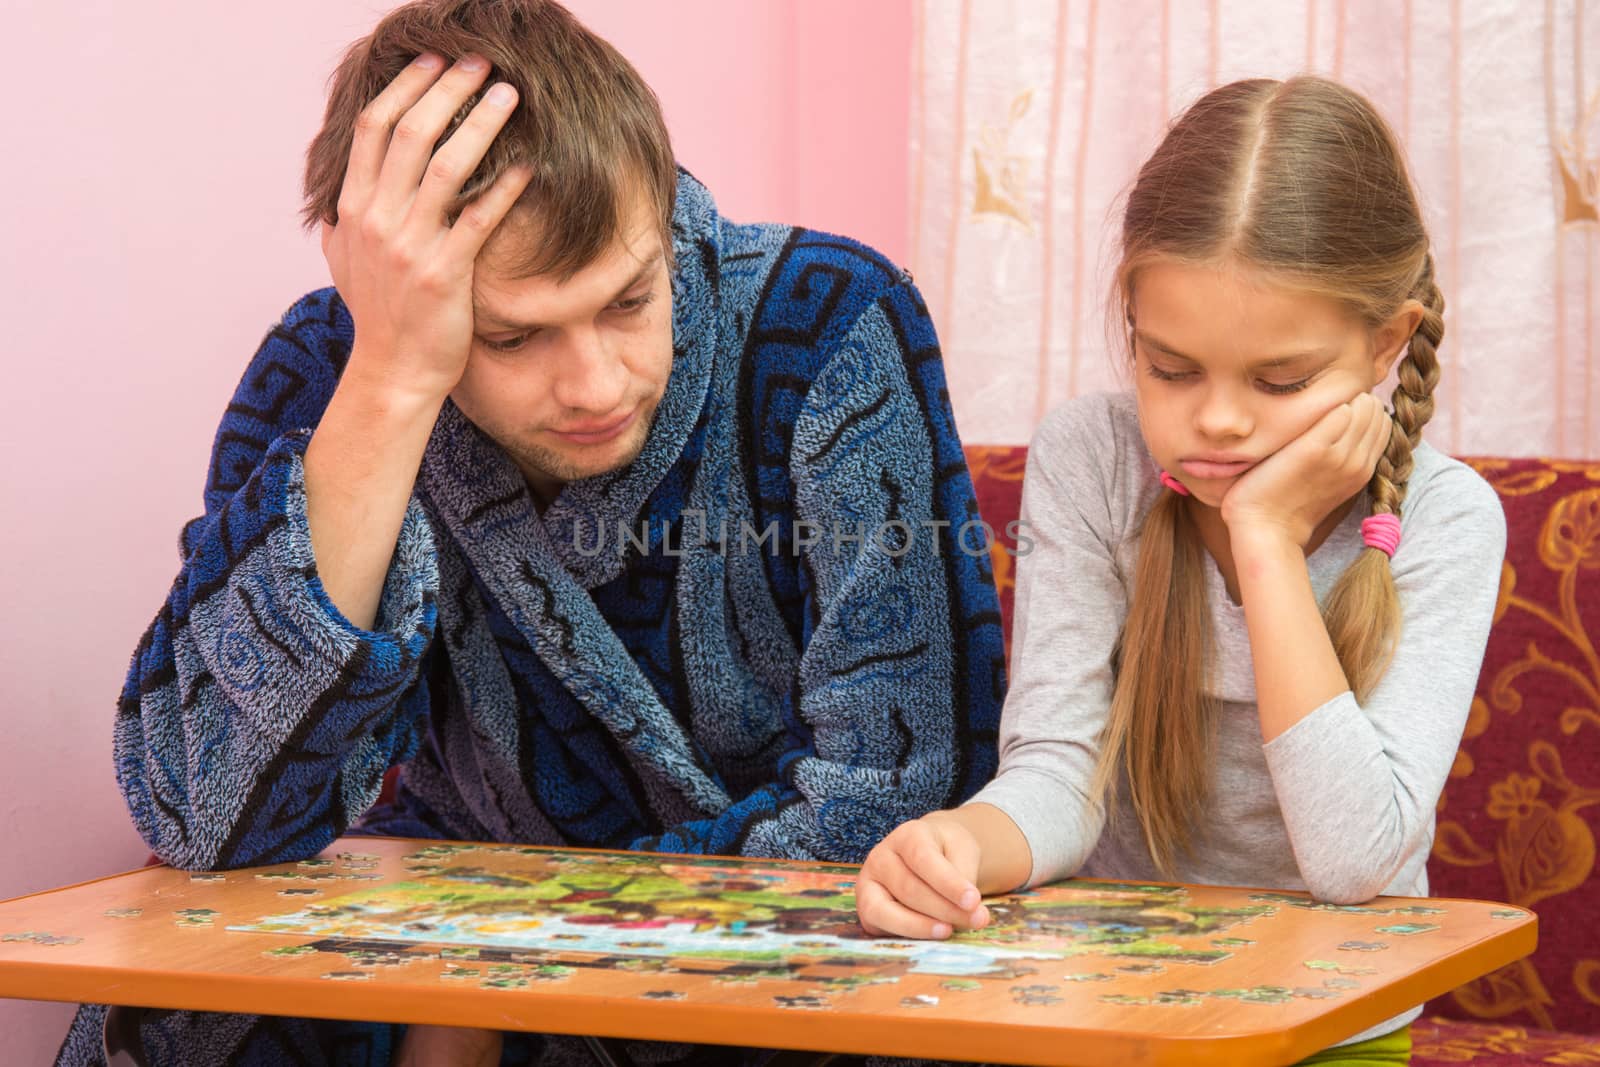 My daughter collects a picture from puzzles, tired dad sitting next to her and tells